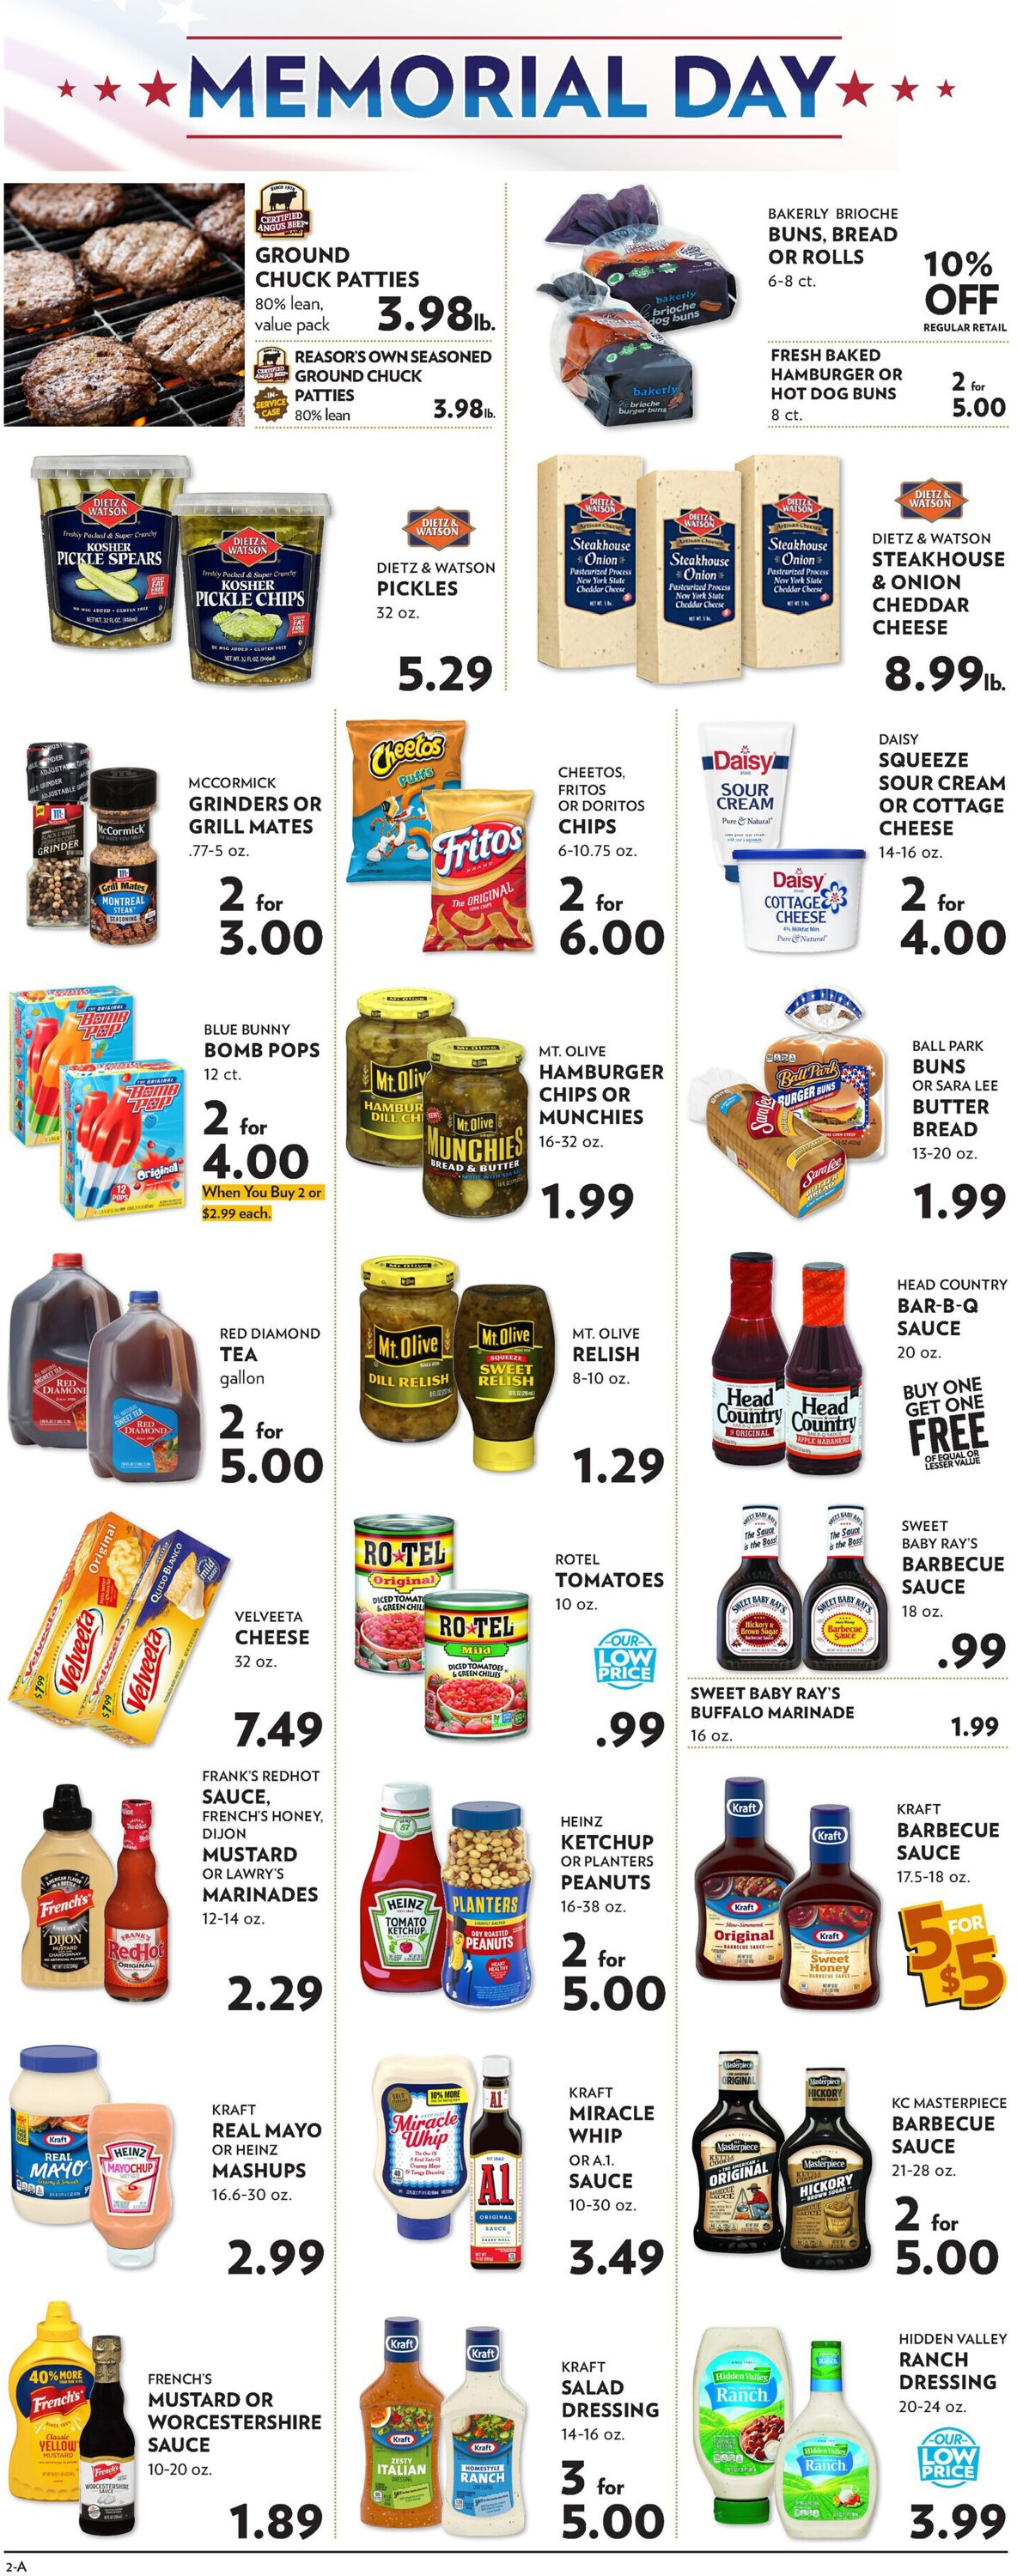 Reasor's Ad from 05/26/2021